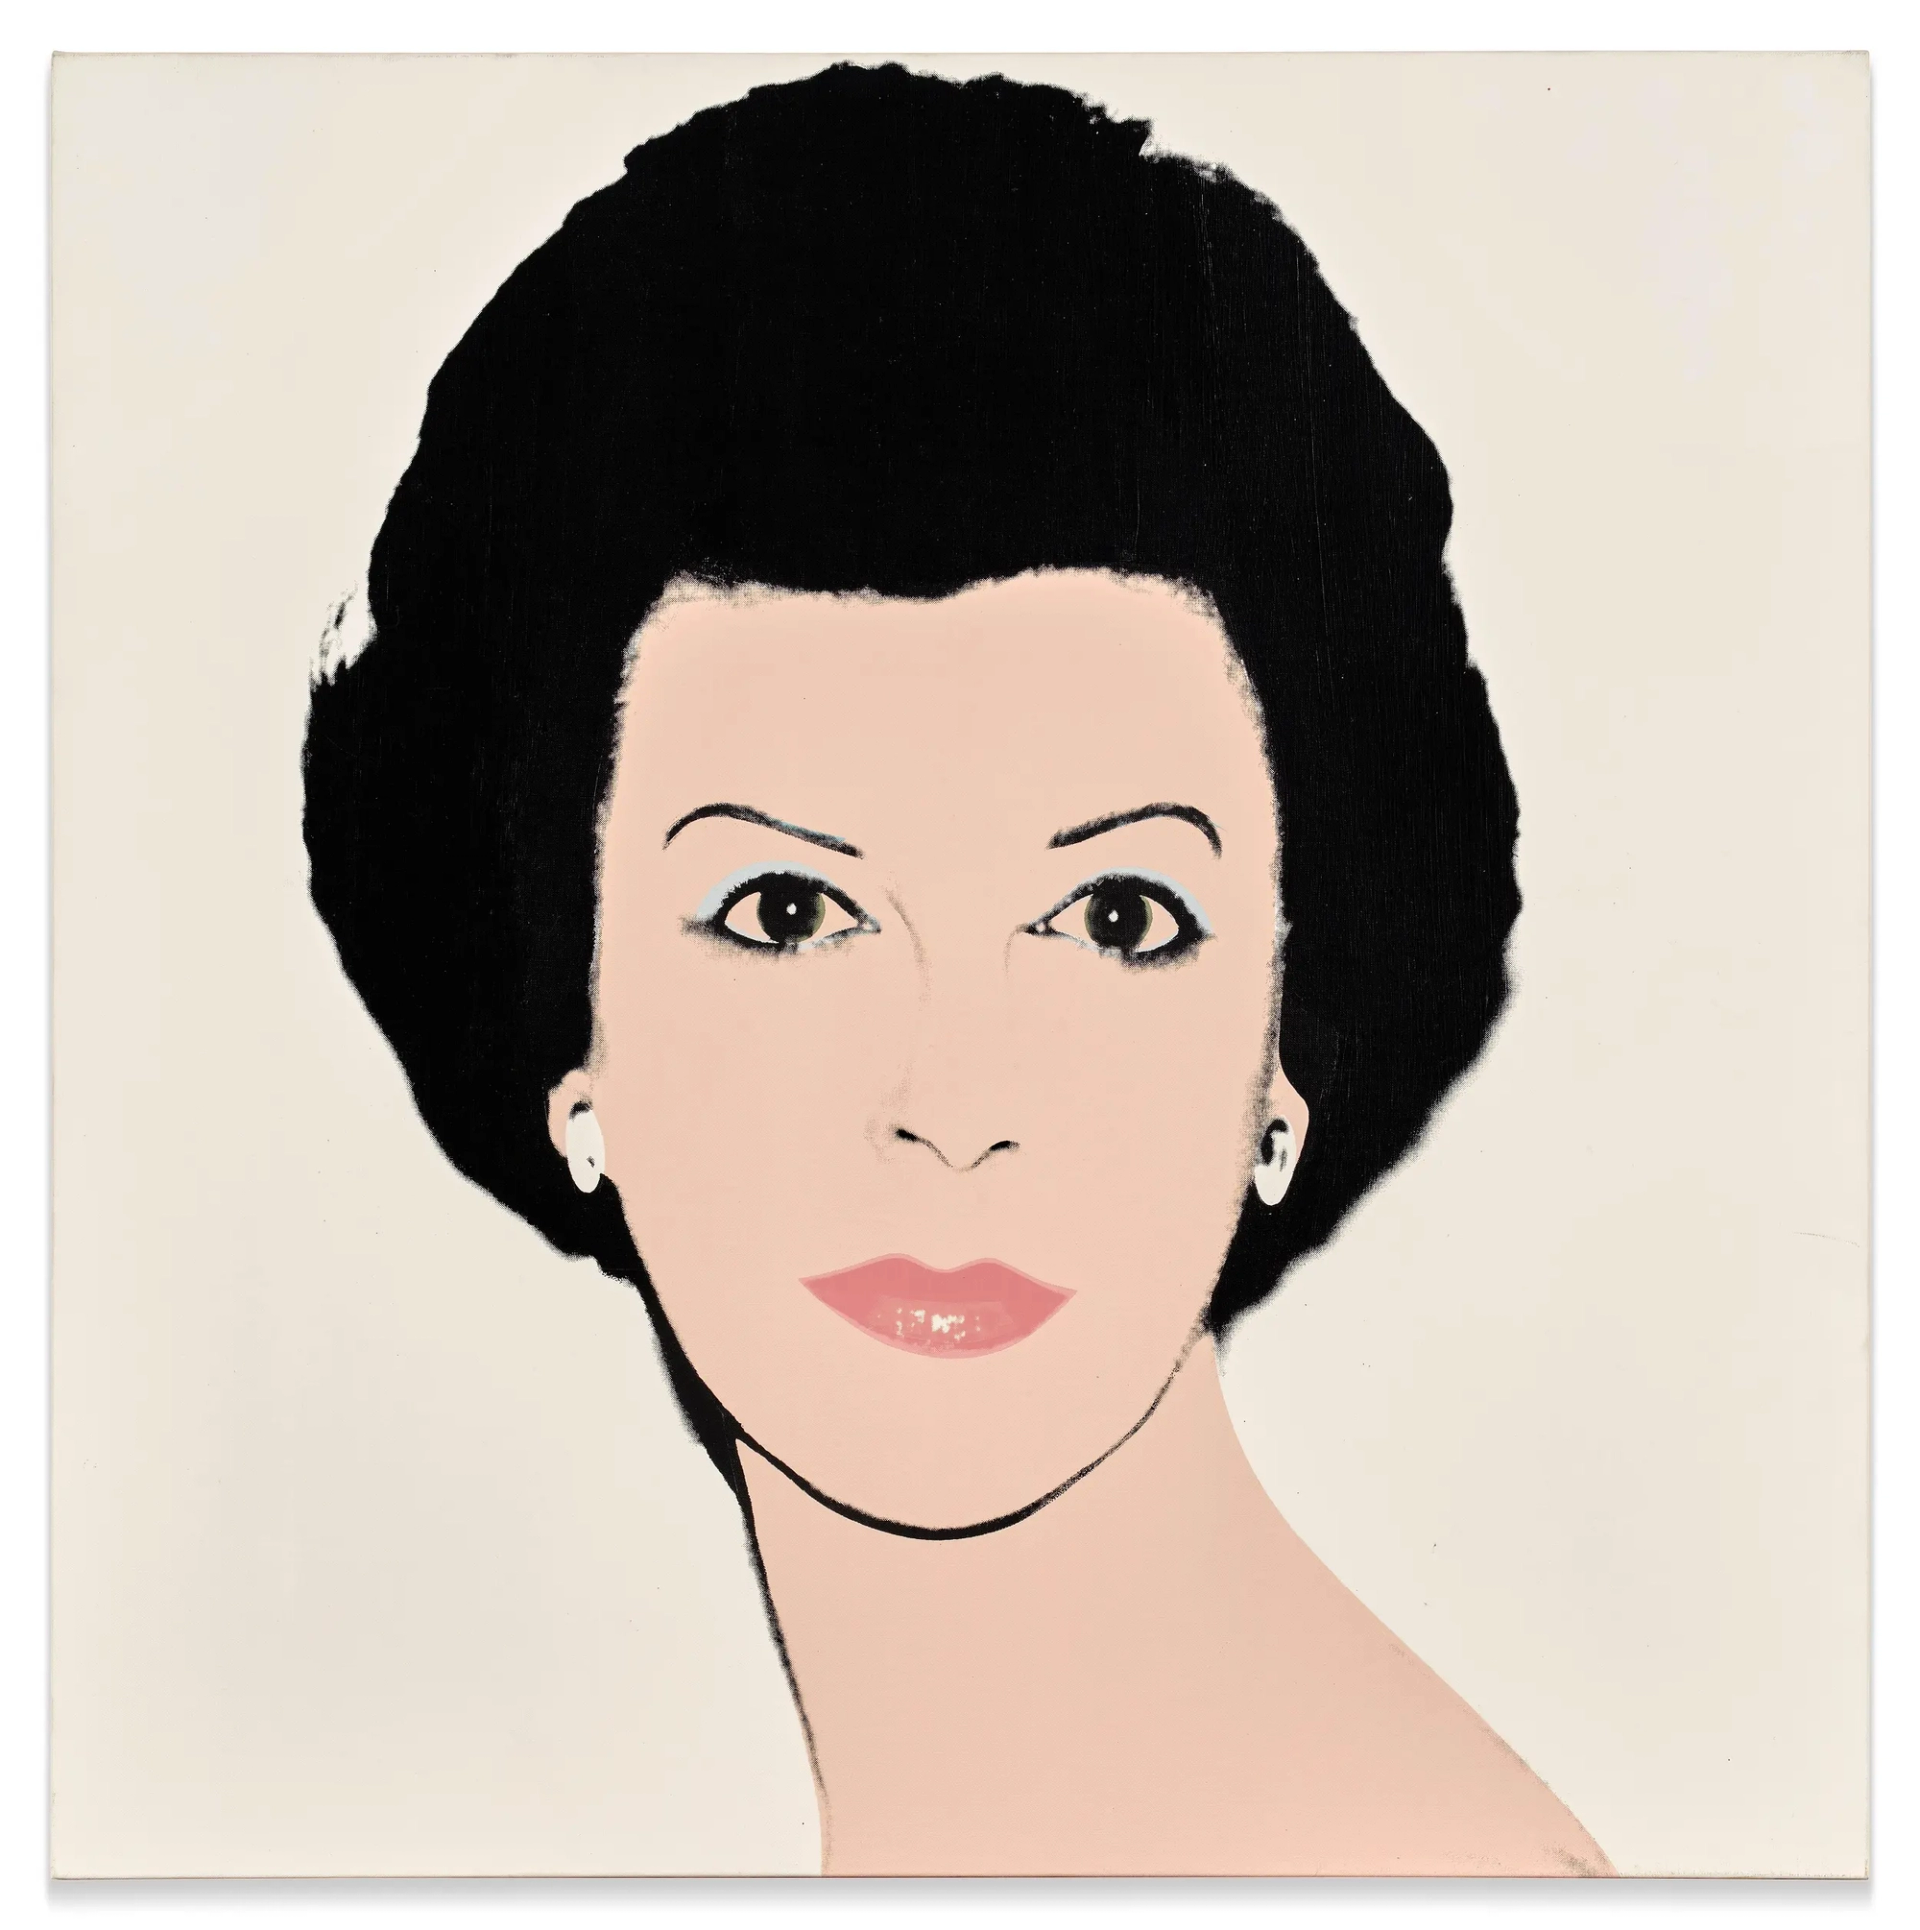 A portrait of Emily Fisher Landau by Andy Warhol. It shows the art patron depicted in Warhol's characteristically graphic style against a white background.